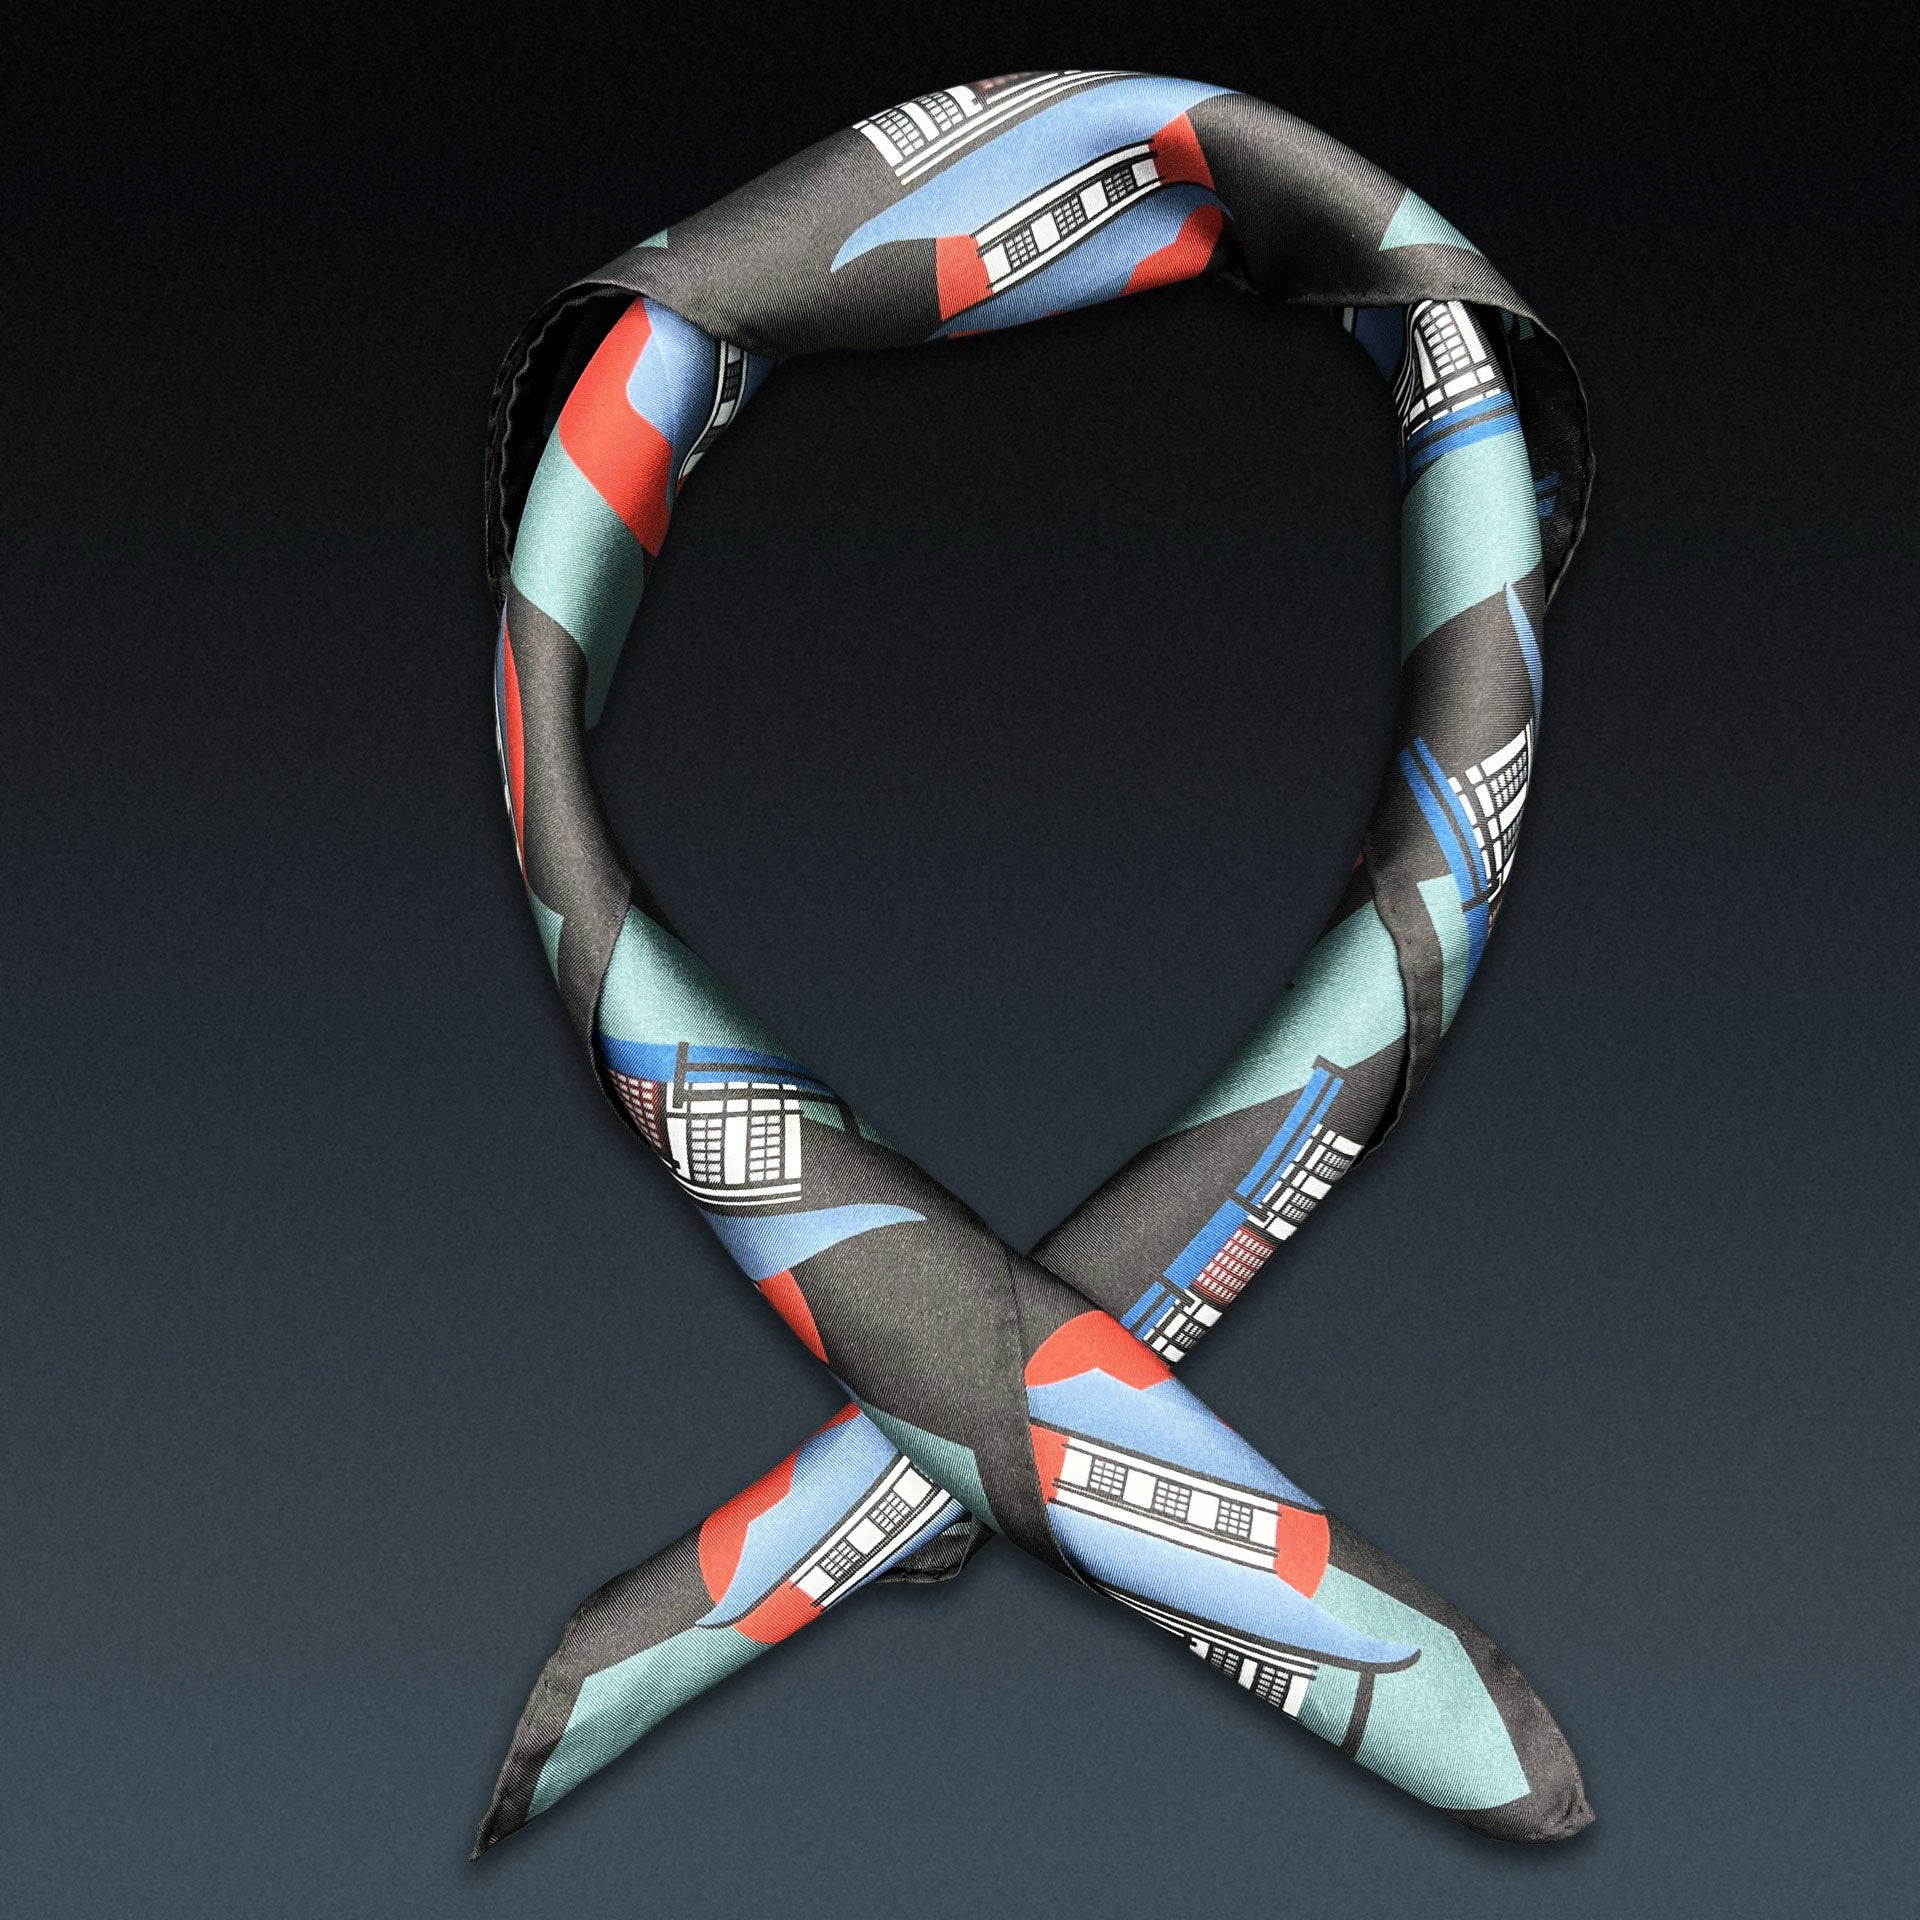 'The House' neckerchief twisted and curled into a loop on a dark background.